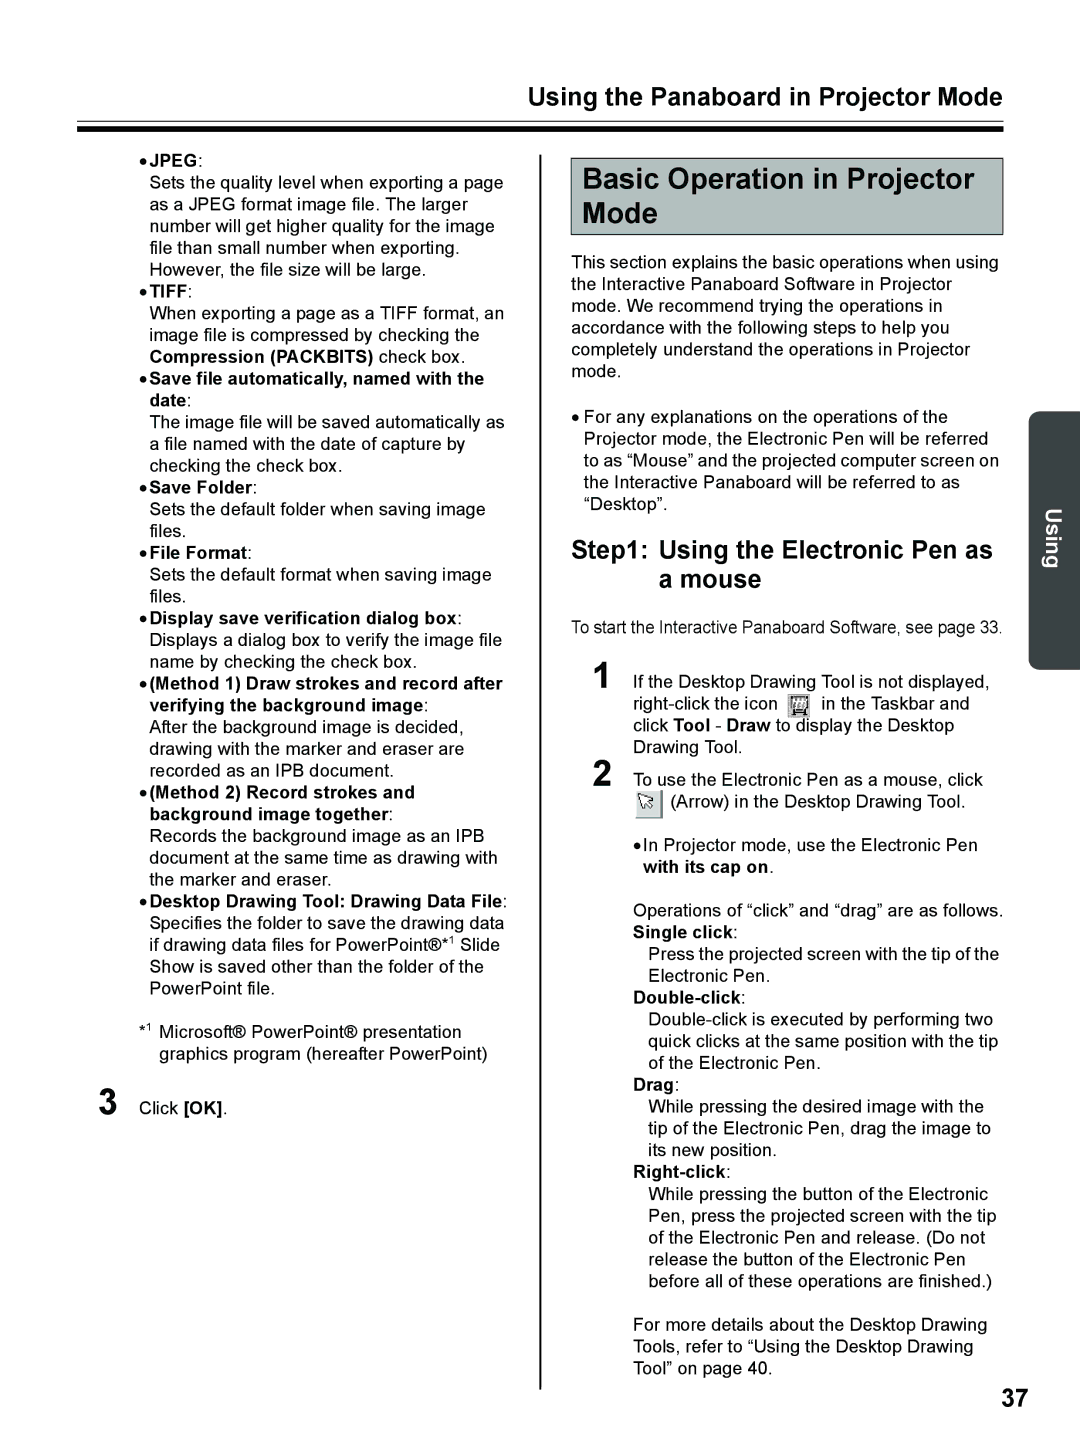 Panasonic UB-8325 operating instructions Basic Operation in Projector Mode, Using the Electronic Pen as a mouse 